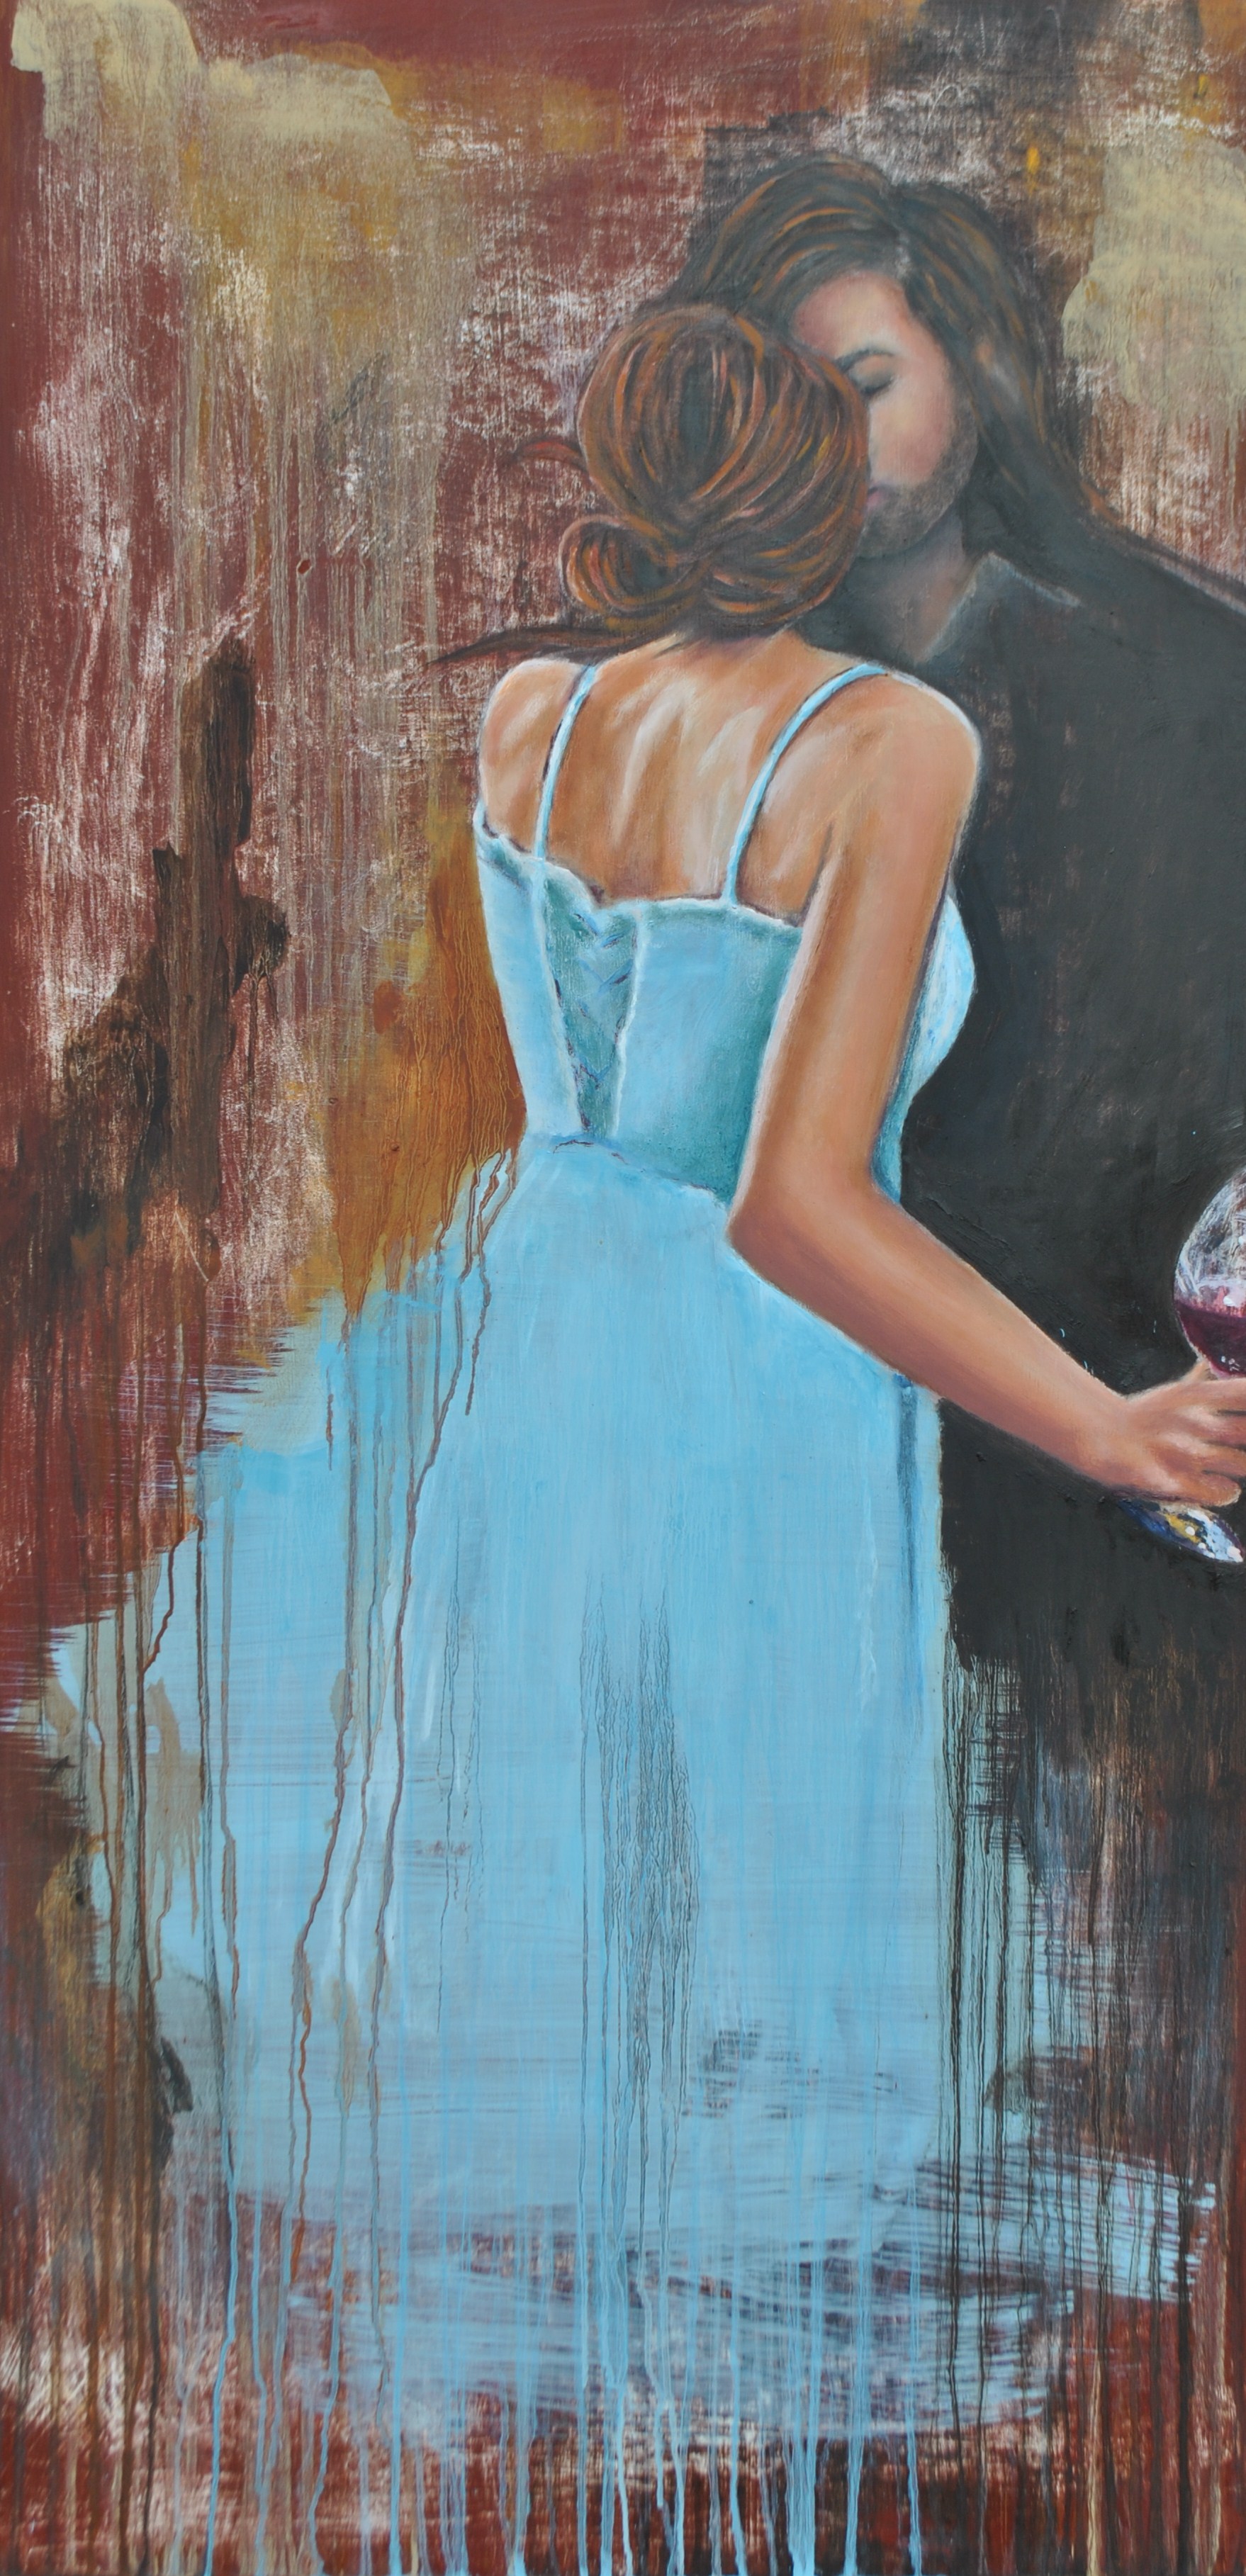 Wedding at Cana 24x48 Oil On Wood Available, Prints available